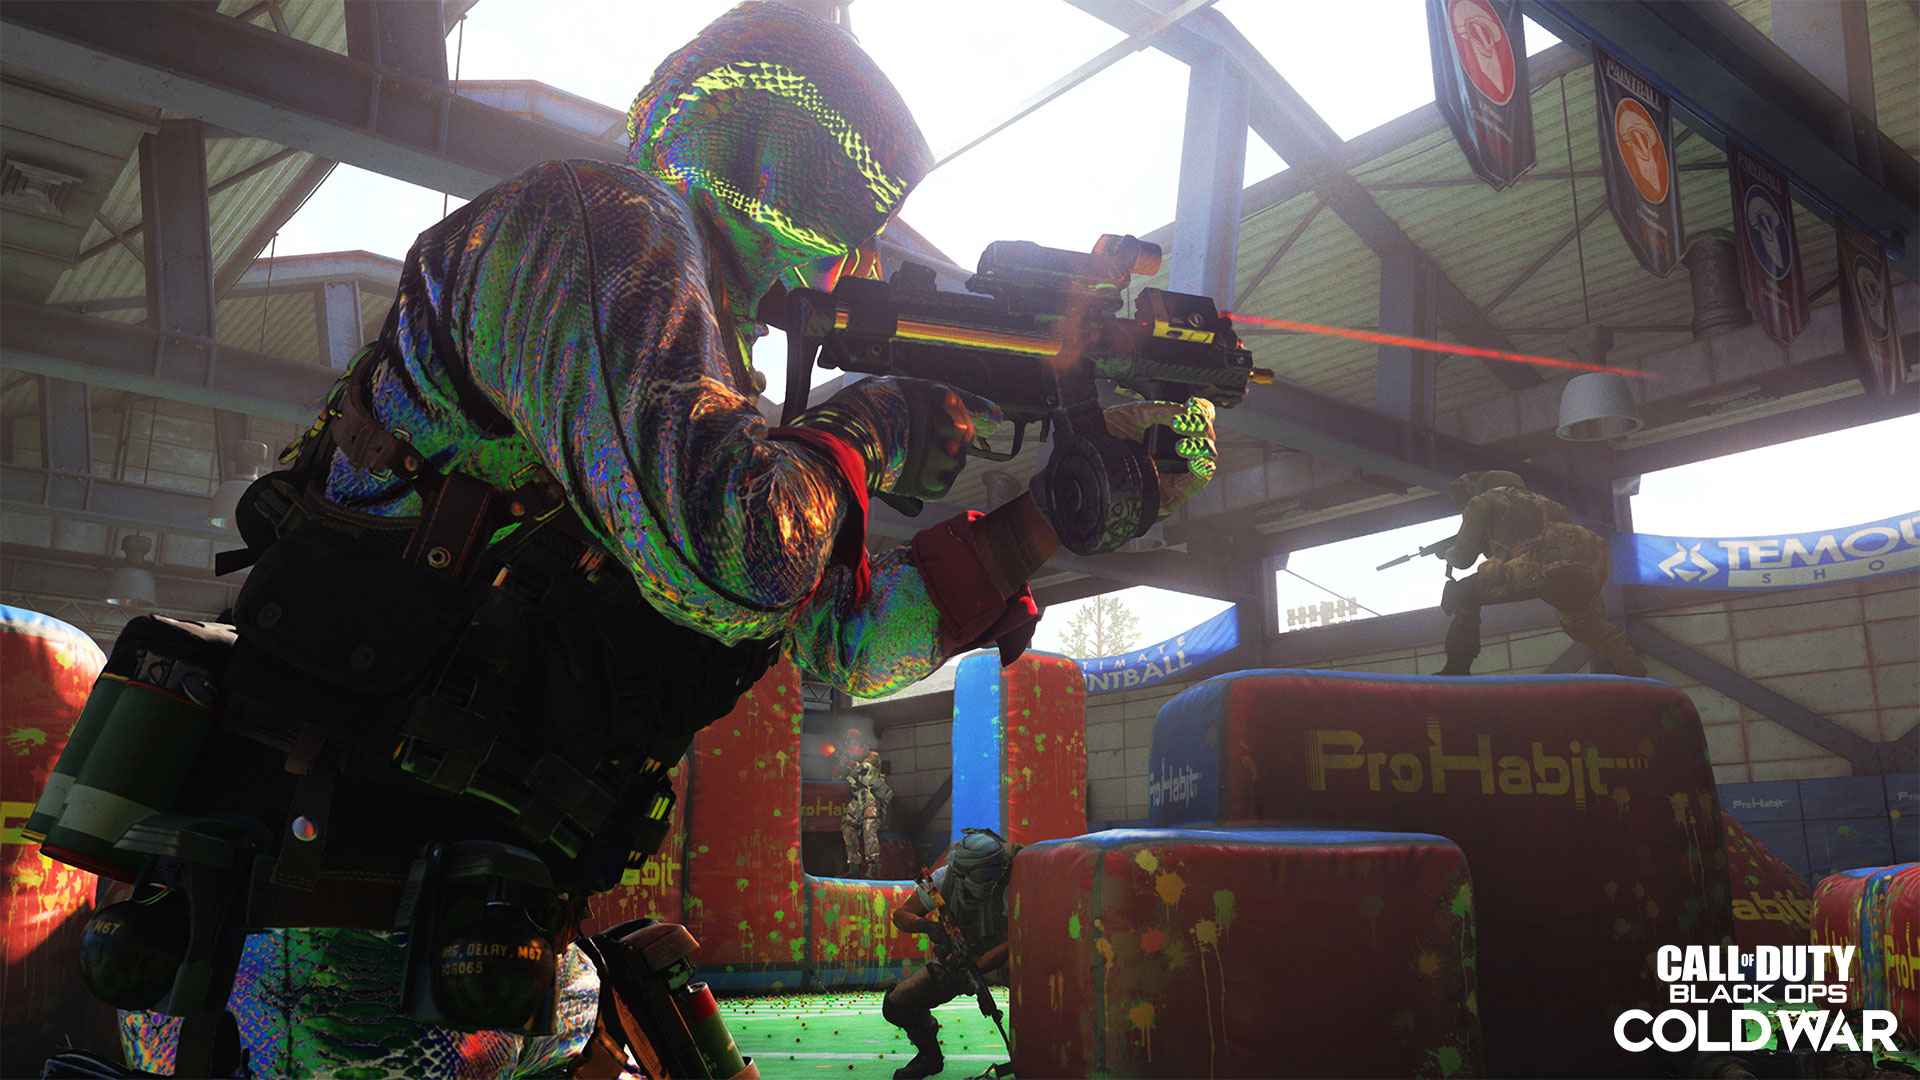 A shootout in the paintball arena